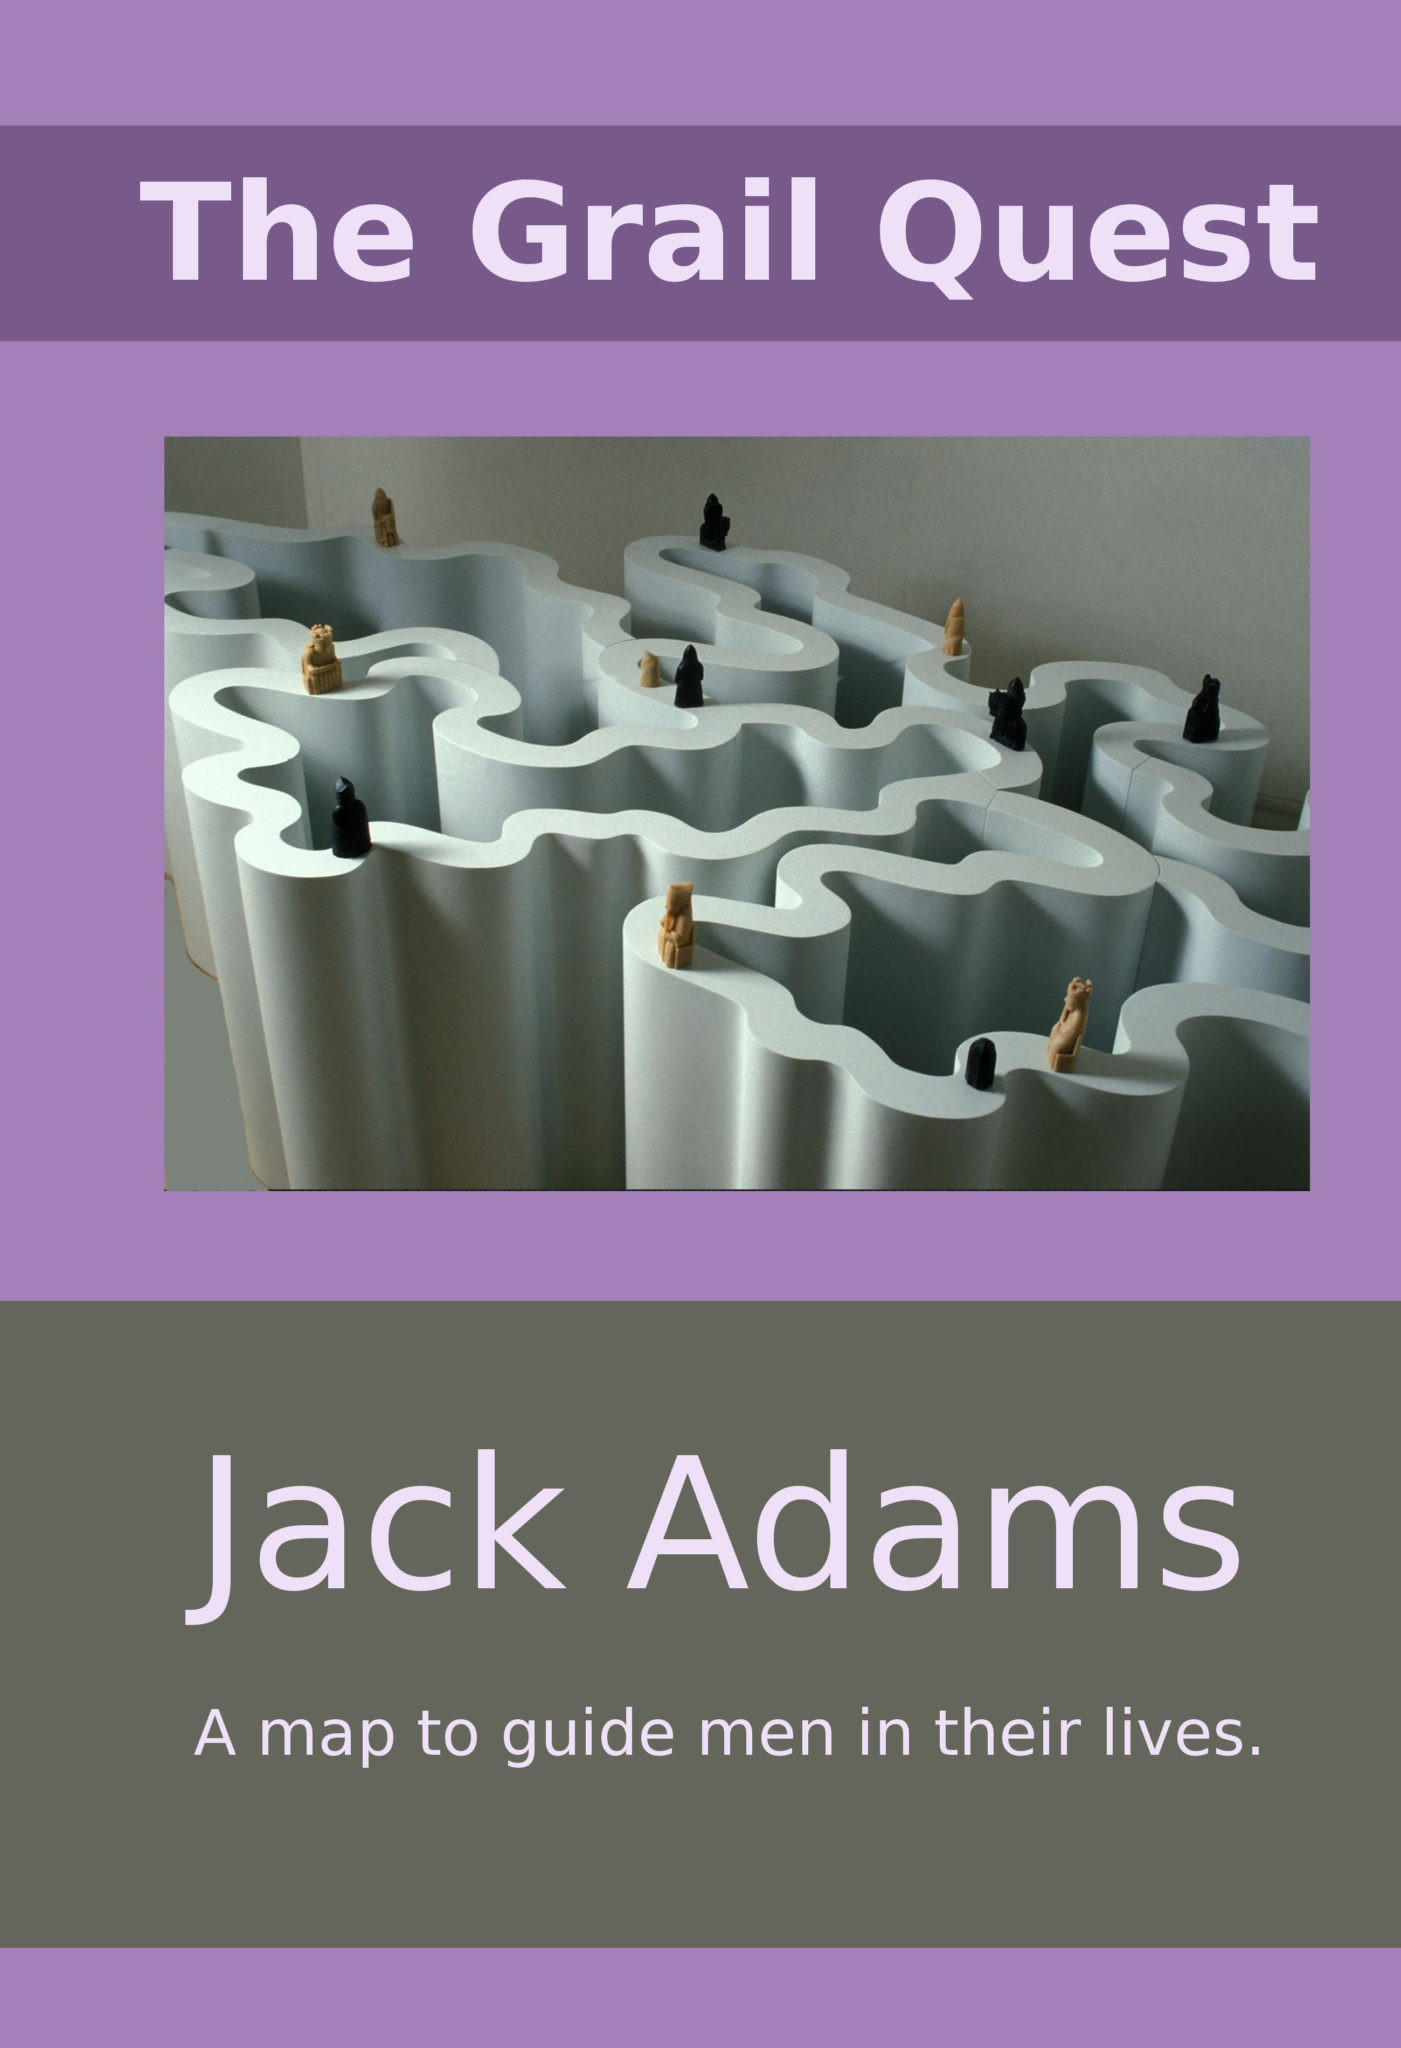 The Grail Quest by Jack Adams book cover